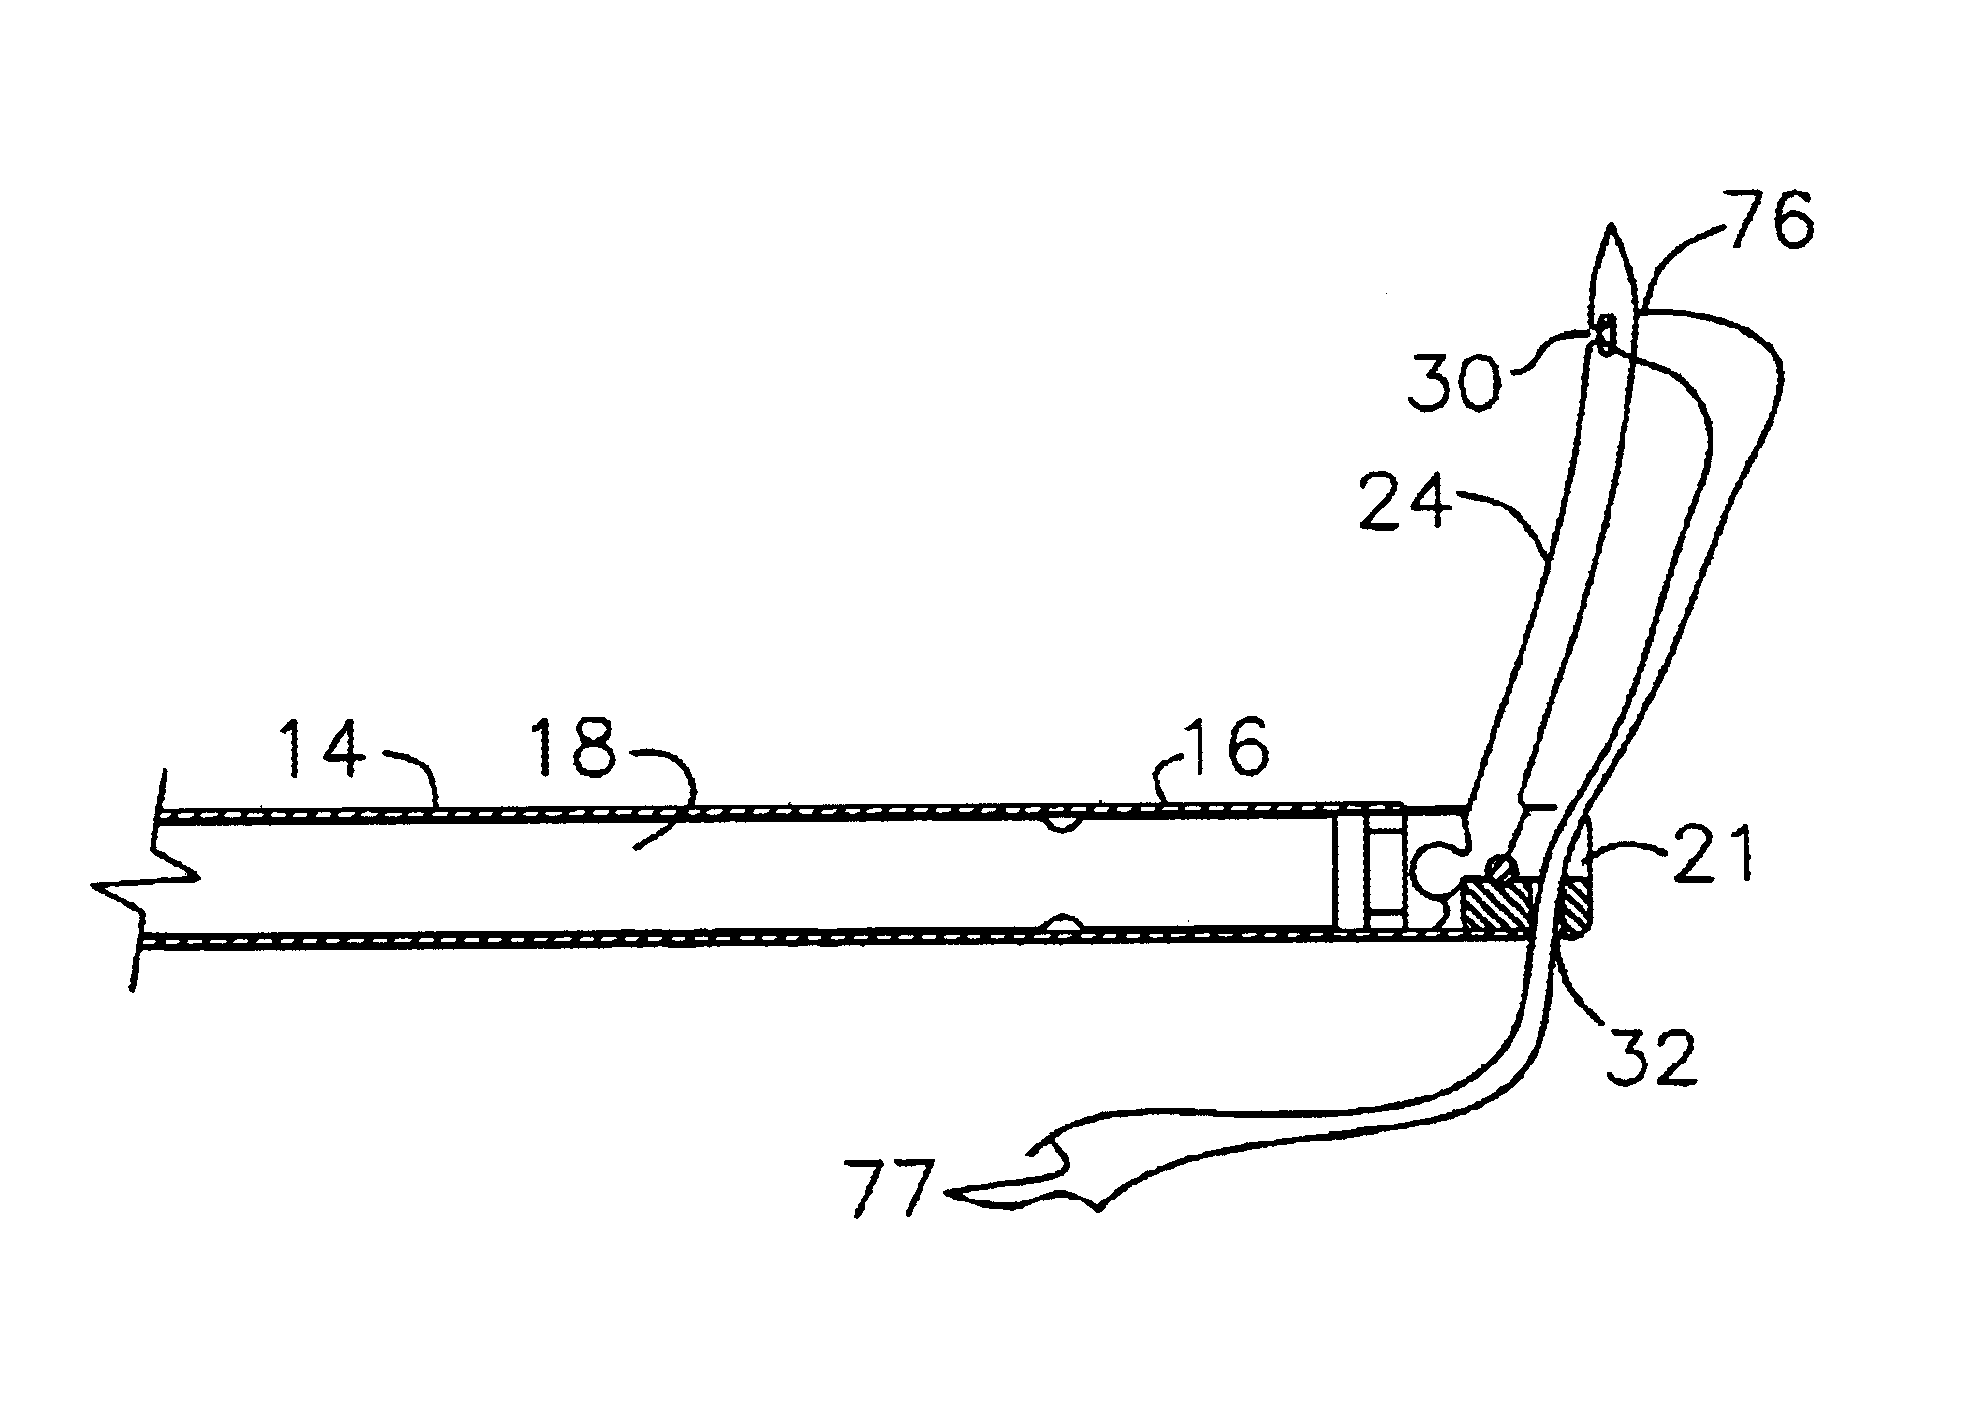 Apparatus for sewing tissue and method of use